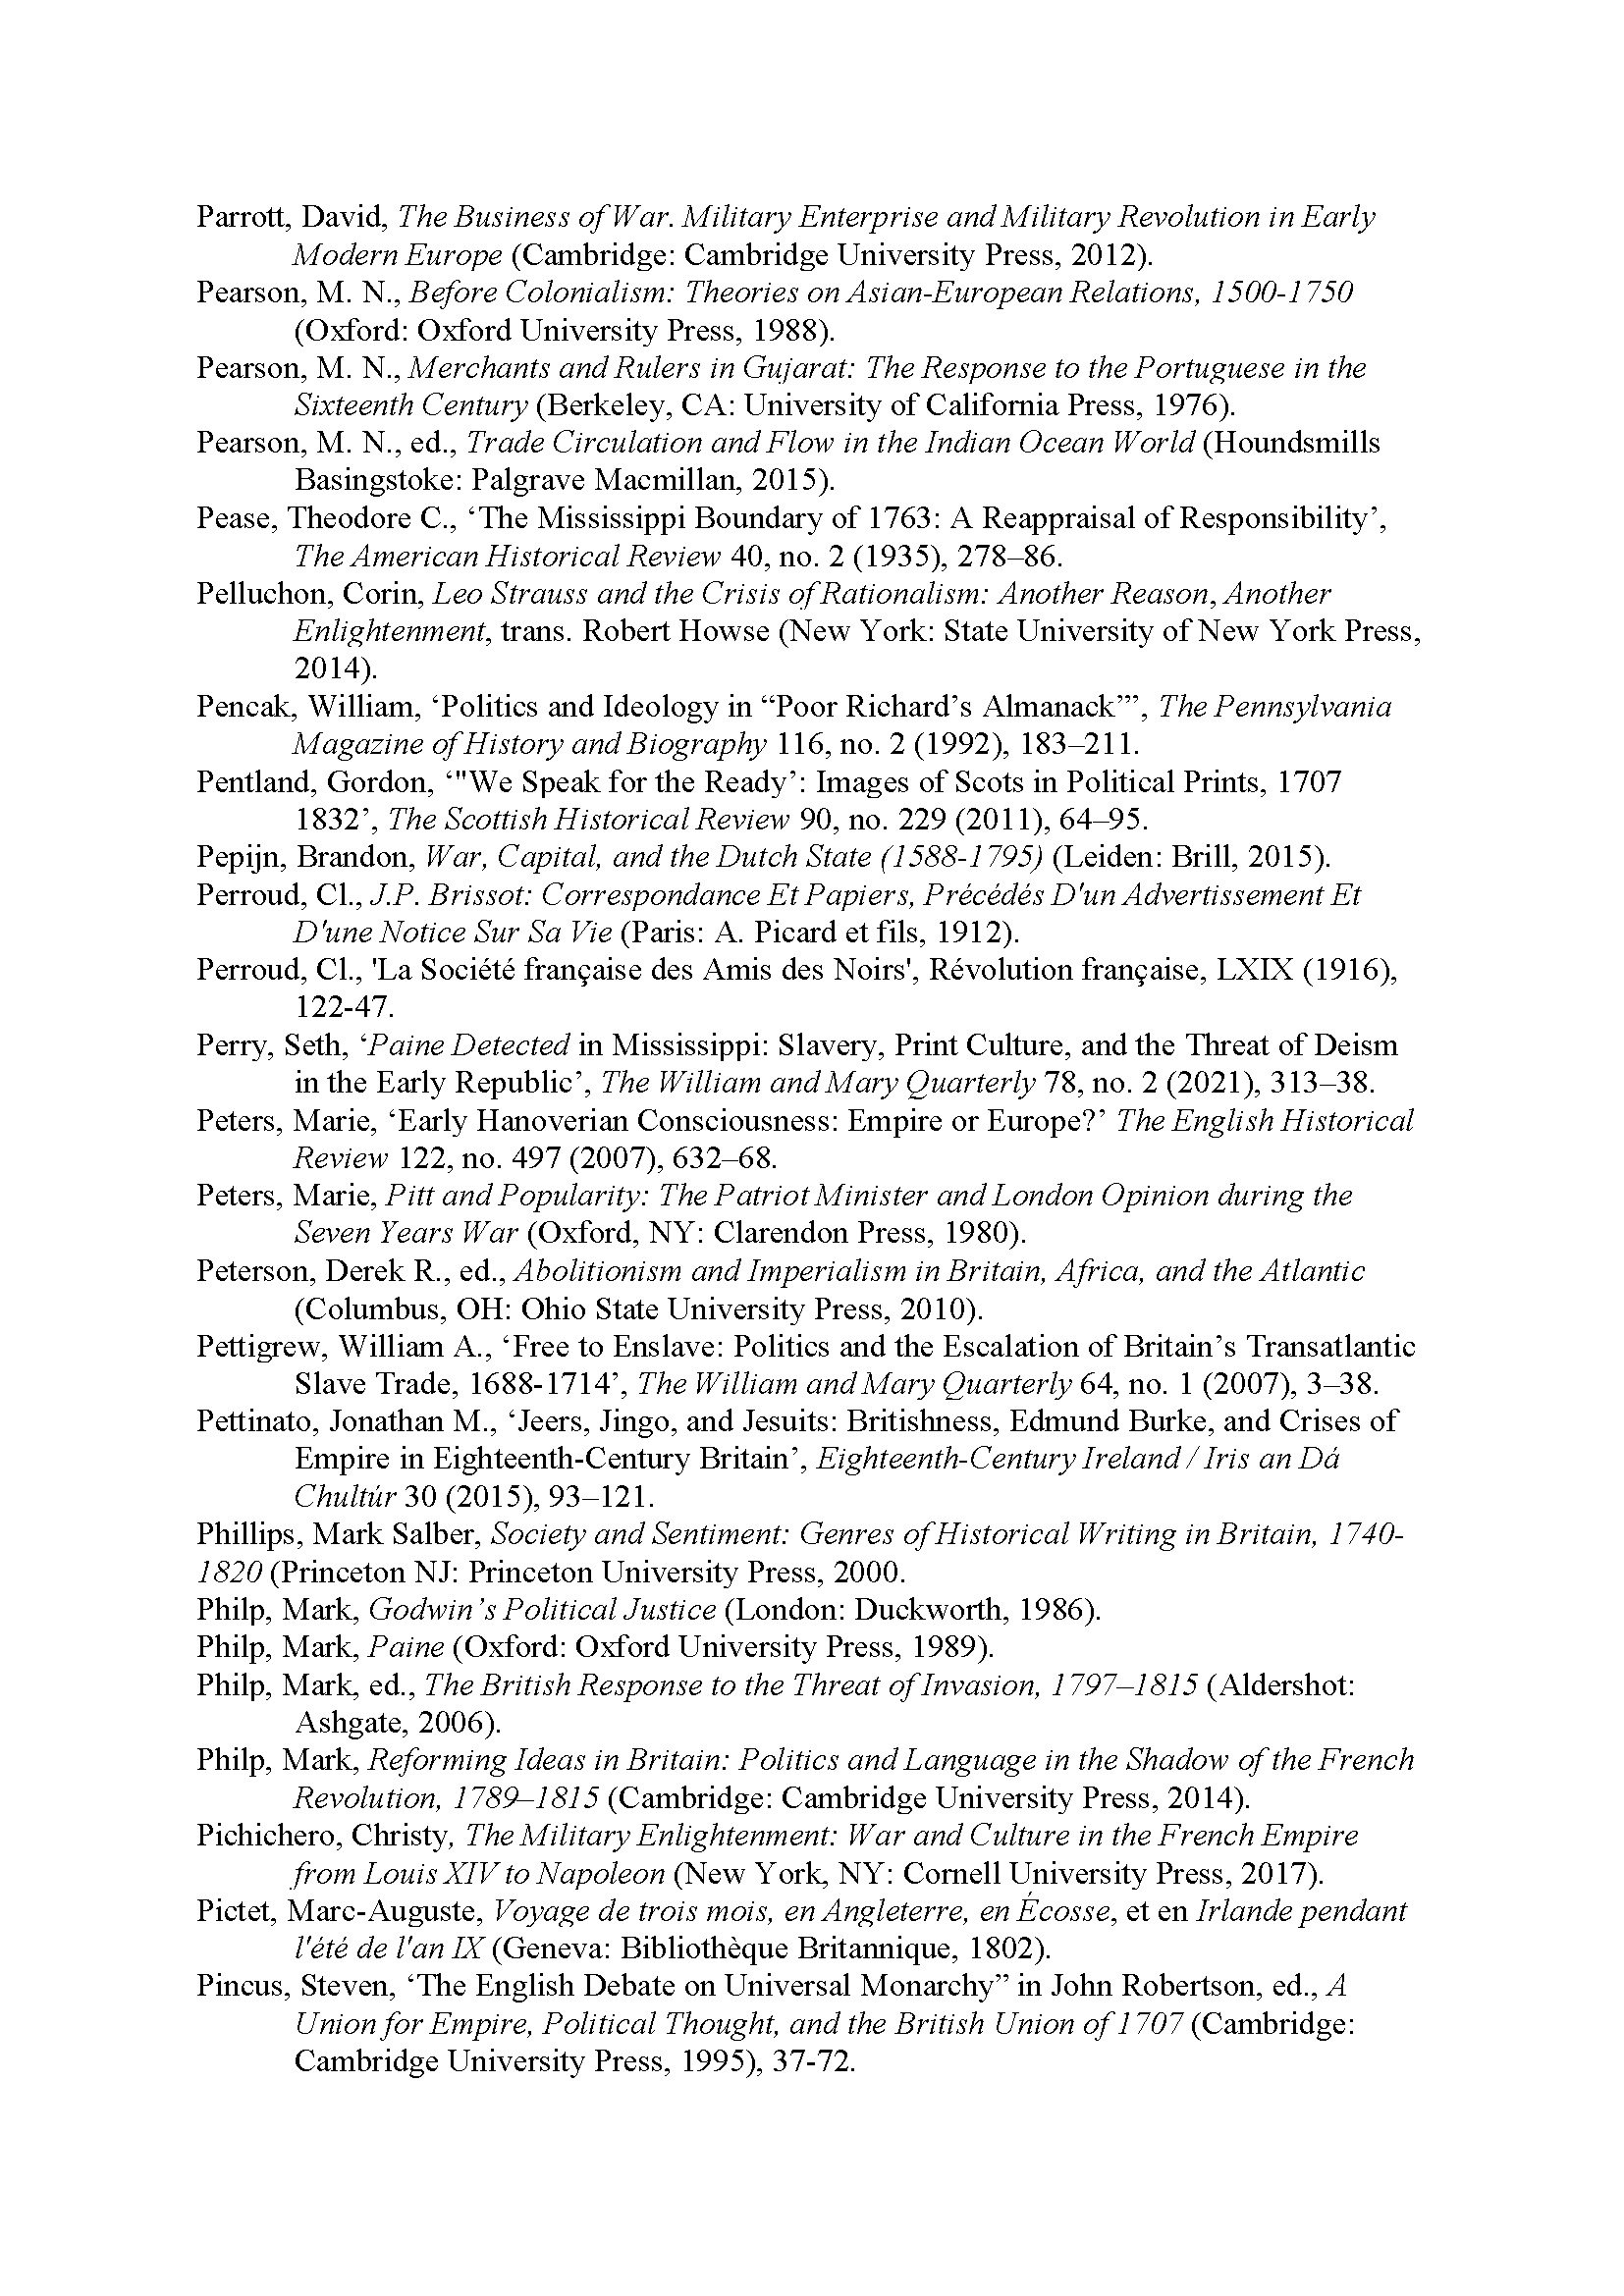 End of the Enlightment_Bibliography[25]_Page_35.jpg